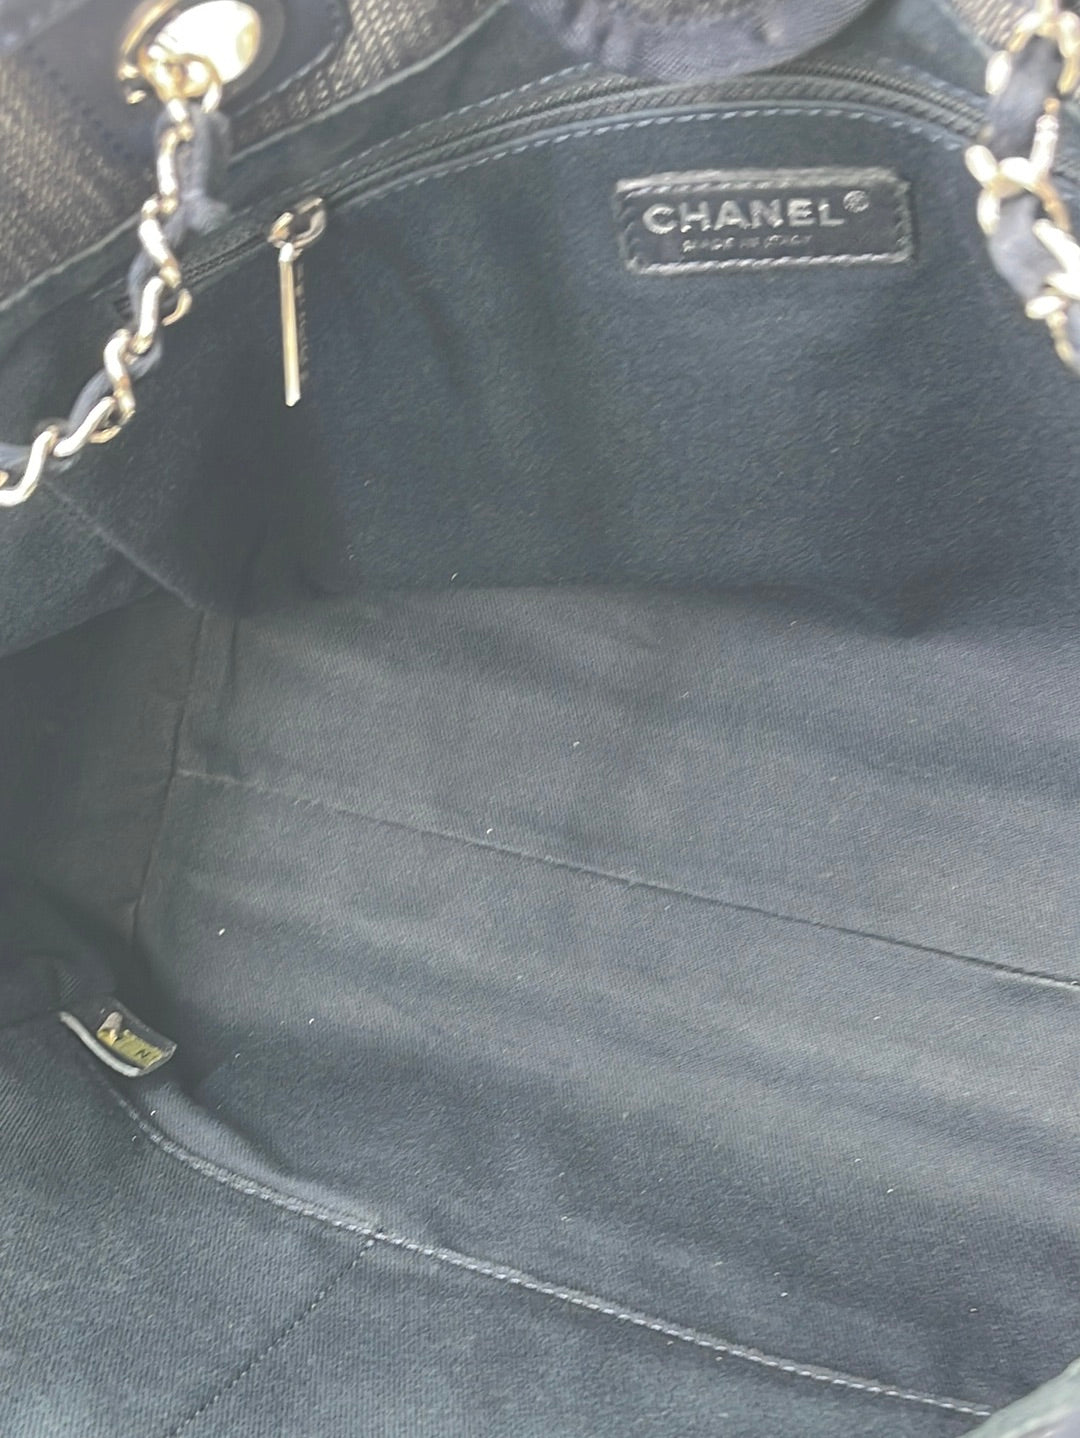 Chanel Navy Blue Large Gabrielle Bag ○ Labellov ○ Buy and Sell Authentic  Luxury